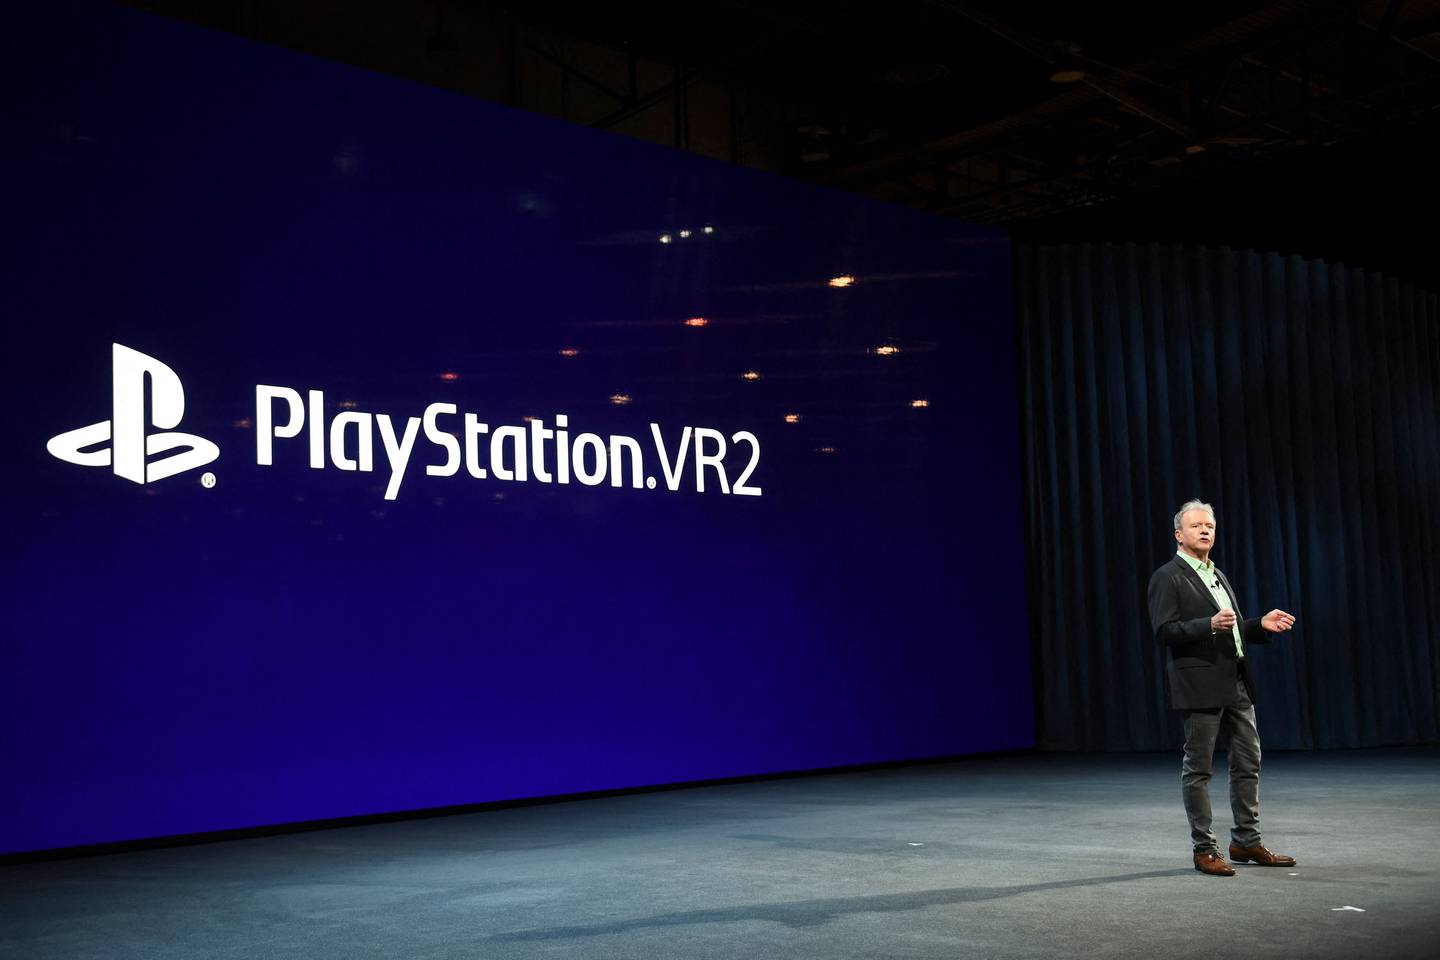 Jim Ryan, Sony Interactive Entertainment president and chief executive officer, speaks about PlayStation VR2 during the Sony press conference ahead of the Consumer Electronics Show (CES) on January 4, 2022 in Las Vegas, Nevada.  - The Consumer Electronics Show (CES), one of the world's largest trade fairs, returns to Las Vegas in person this week under a newly resurgent pandemic that has supercharged the industry but threatens its downsized expo. 
Masks and proof of vaccination are required at the show that opens Wednesday and was trimmed by one day to end Friday, with expected exhibitors down more than half to roughly 2,200 from the last in-person CES.  (Photo by Patrick T.  FALLON  /  AFP)